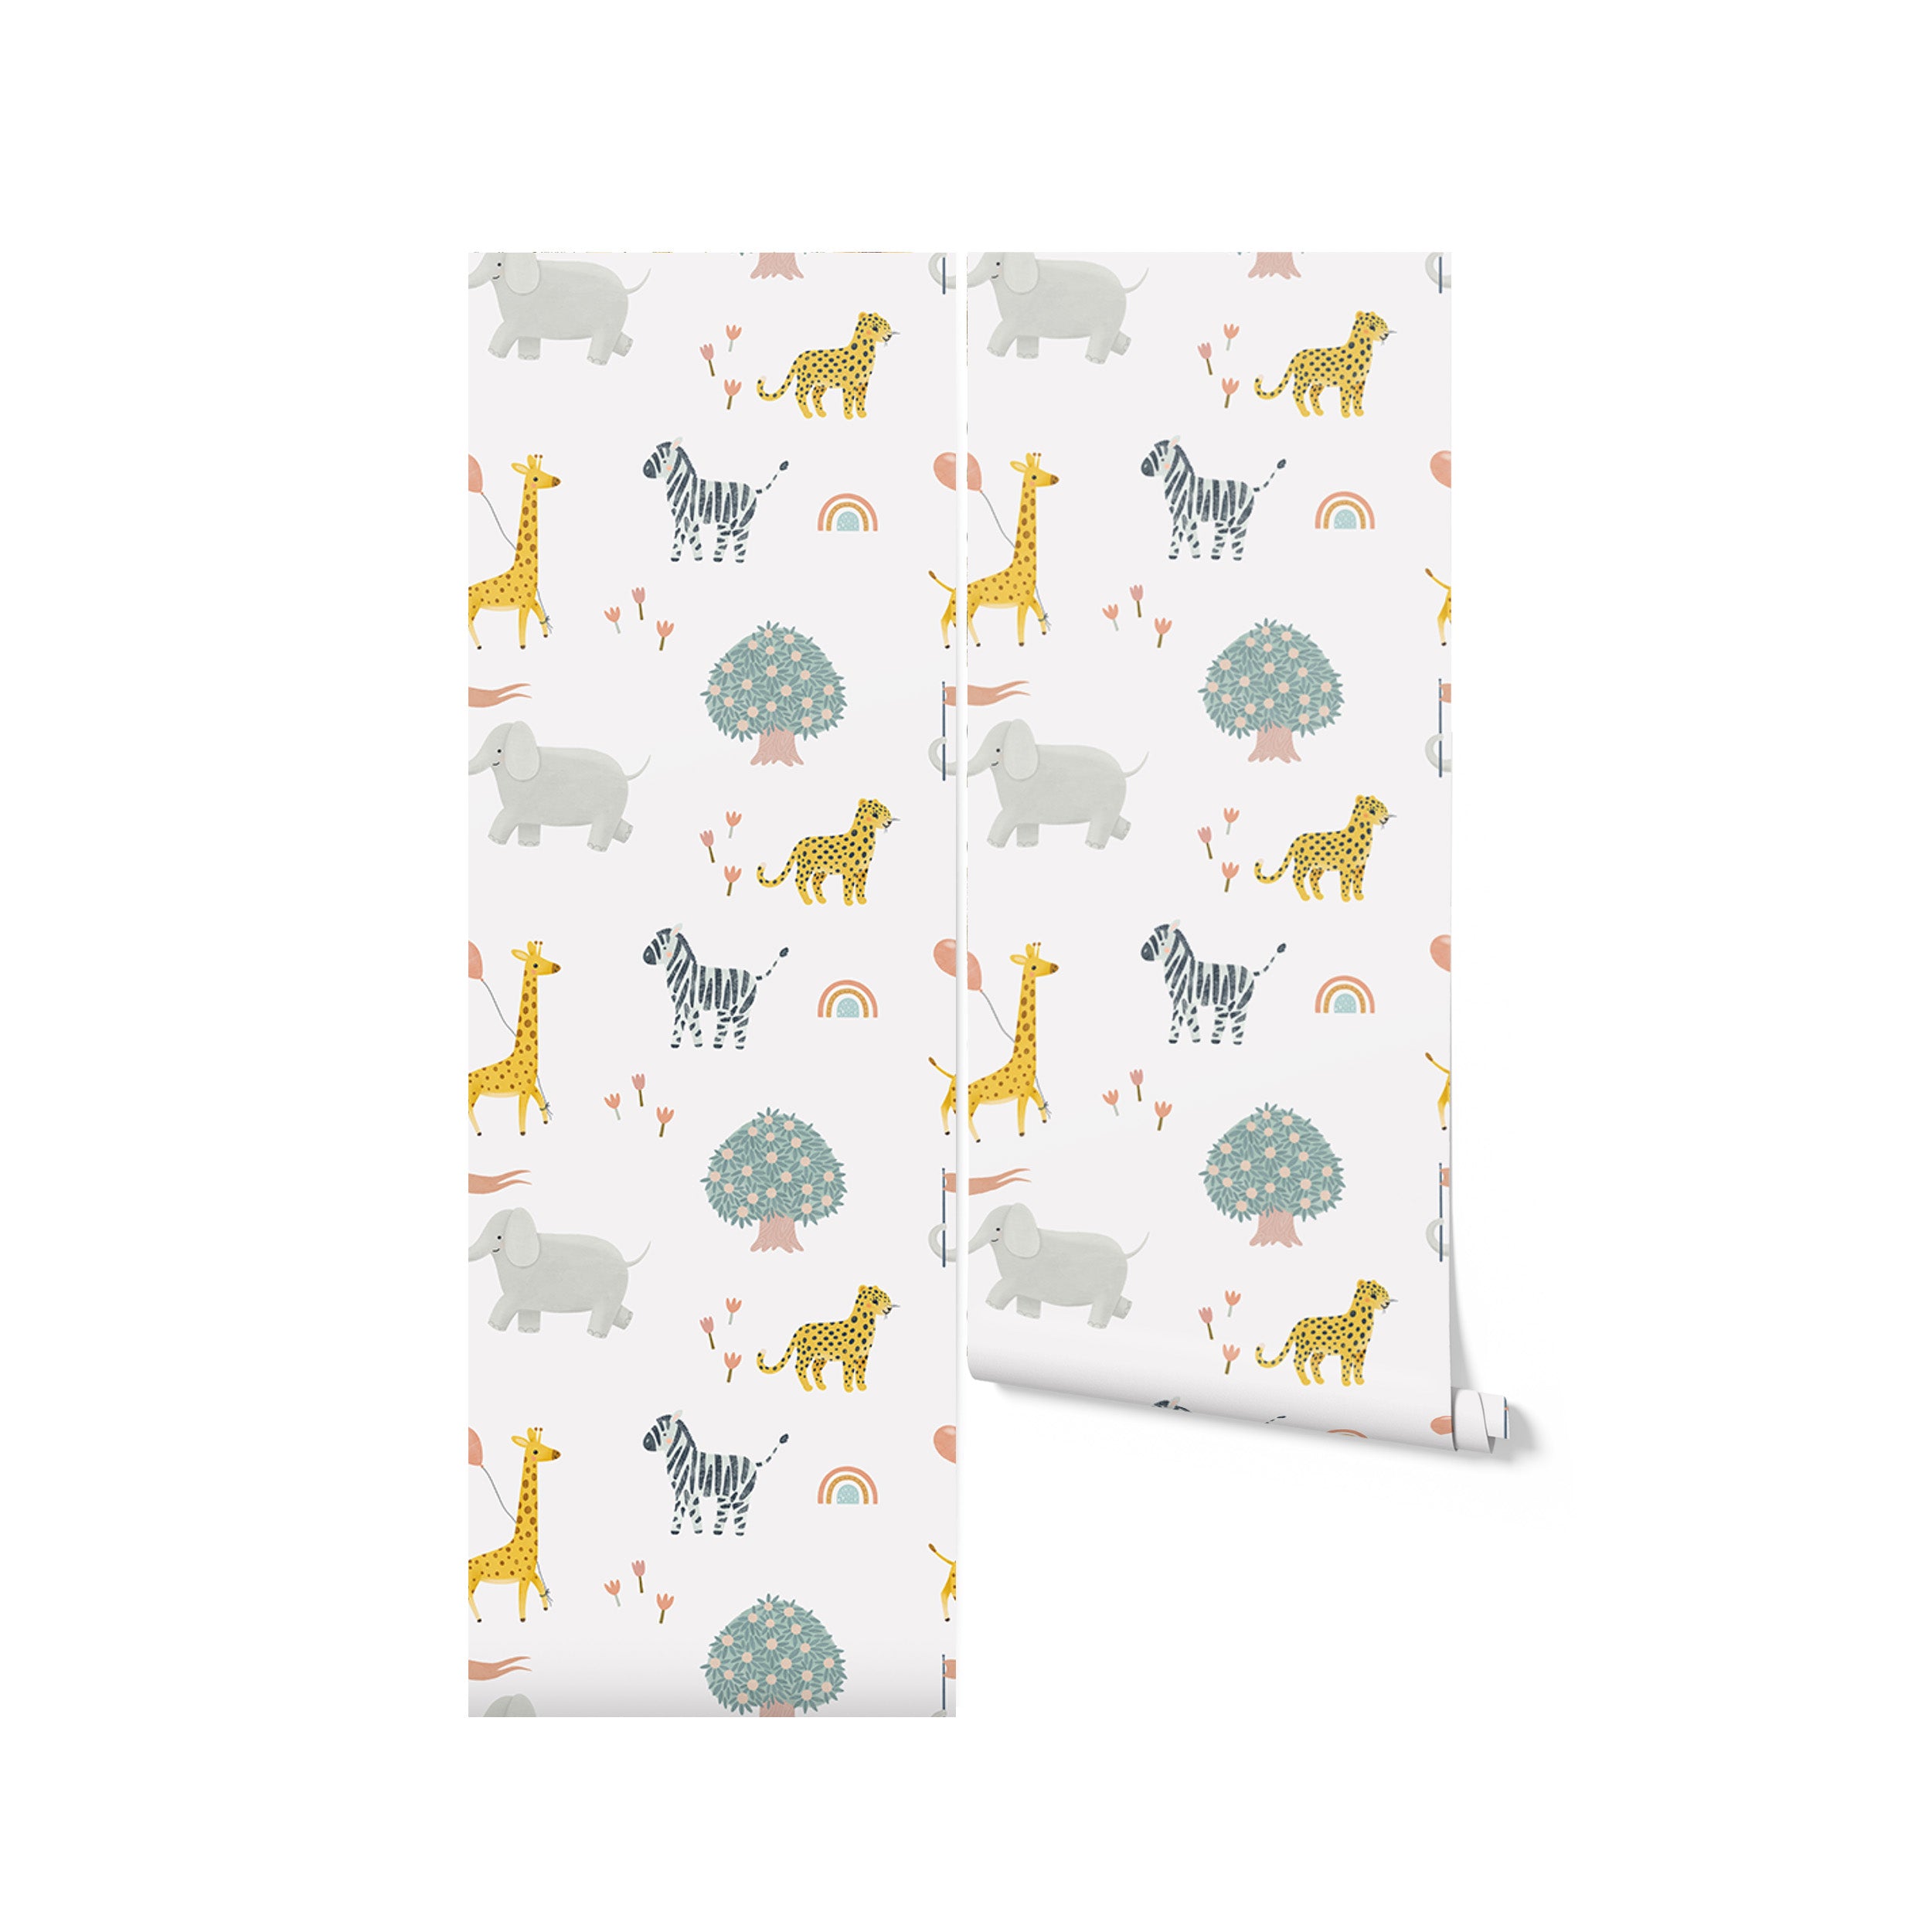 Rolled-up view of Safari Adventure Wallpaper depicting various safari animals like elephants, giraffes, zebras, and cheetahs interspersed with rainbows and flora on a white background, suggesting a lively, yet gentle wall decoration for children's spaces